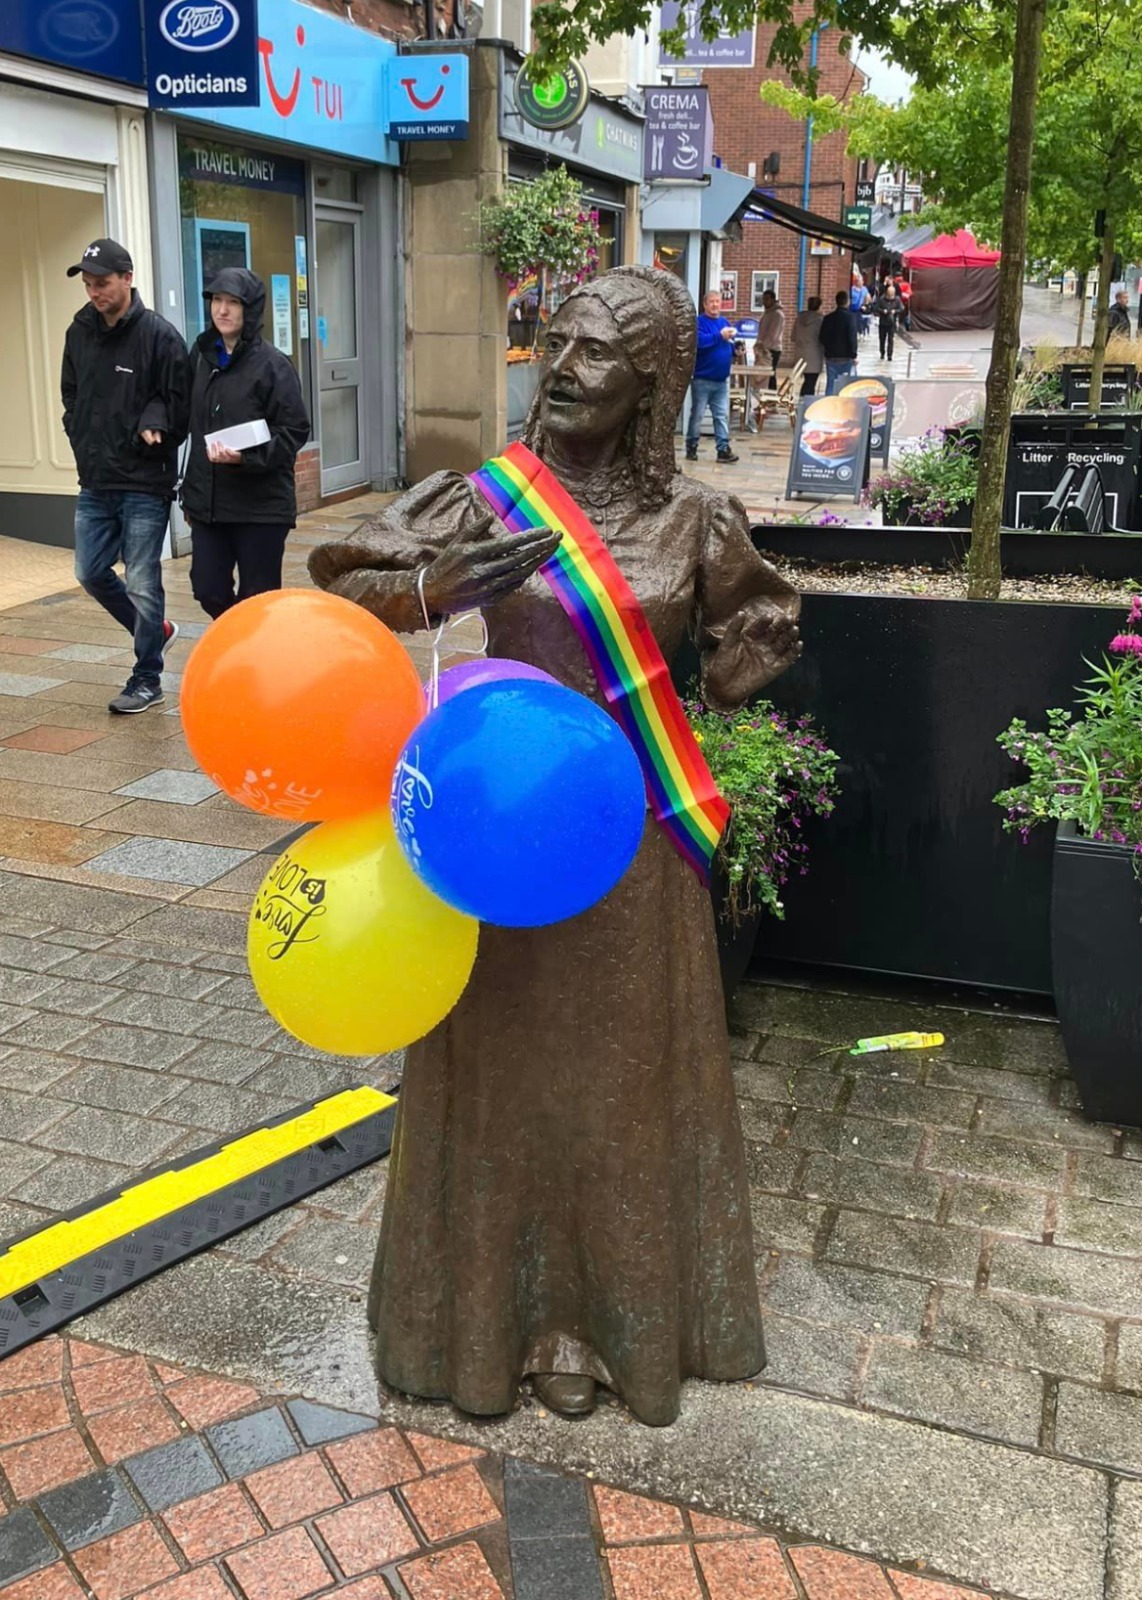 The bronze statue of Our Elizabeth wears a Pride rainbow sash and has multi-coloured balloons attached to her arms